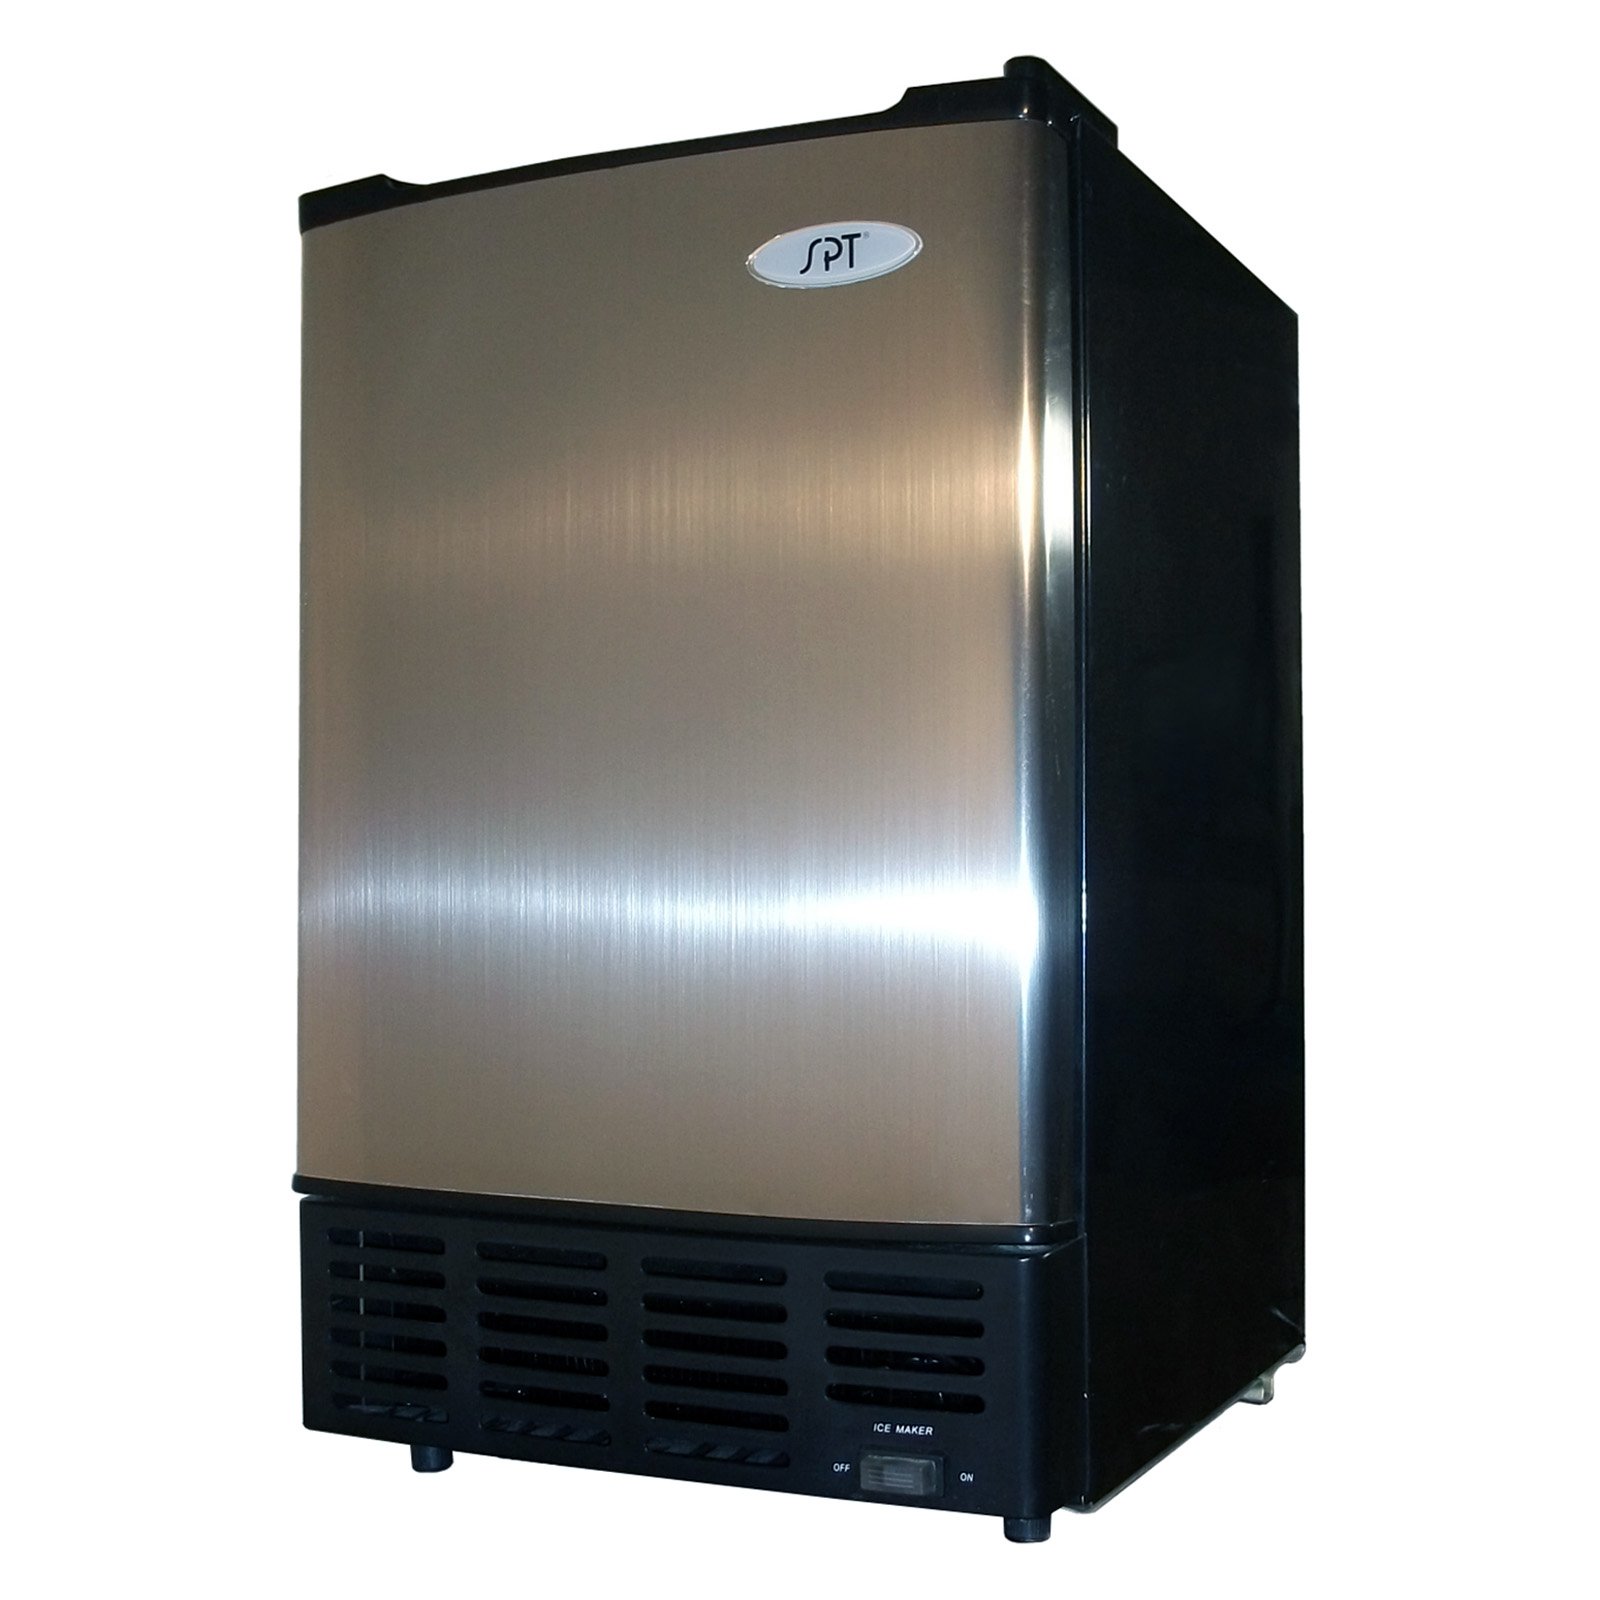 Sunpentown Under-the-Counter Thermo-Electric Ice Maker, Stainless Steel - image 1 of 3